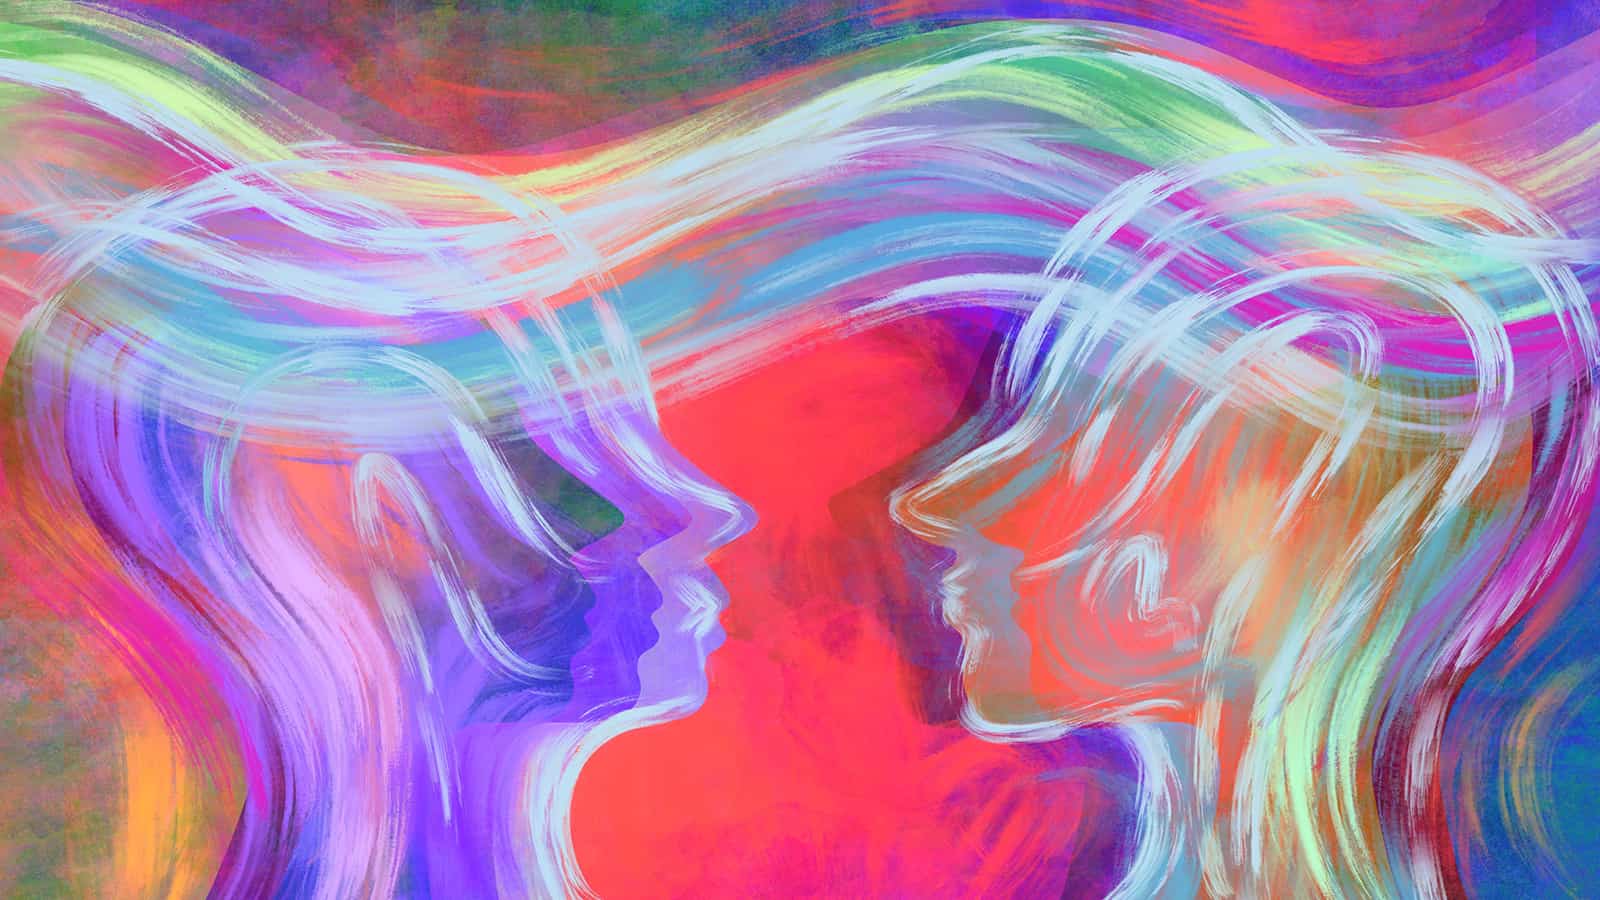 Twitter Users Explain What It’s Like Being an Empath